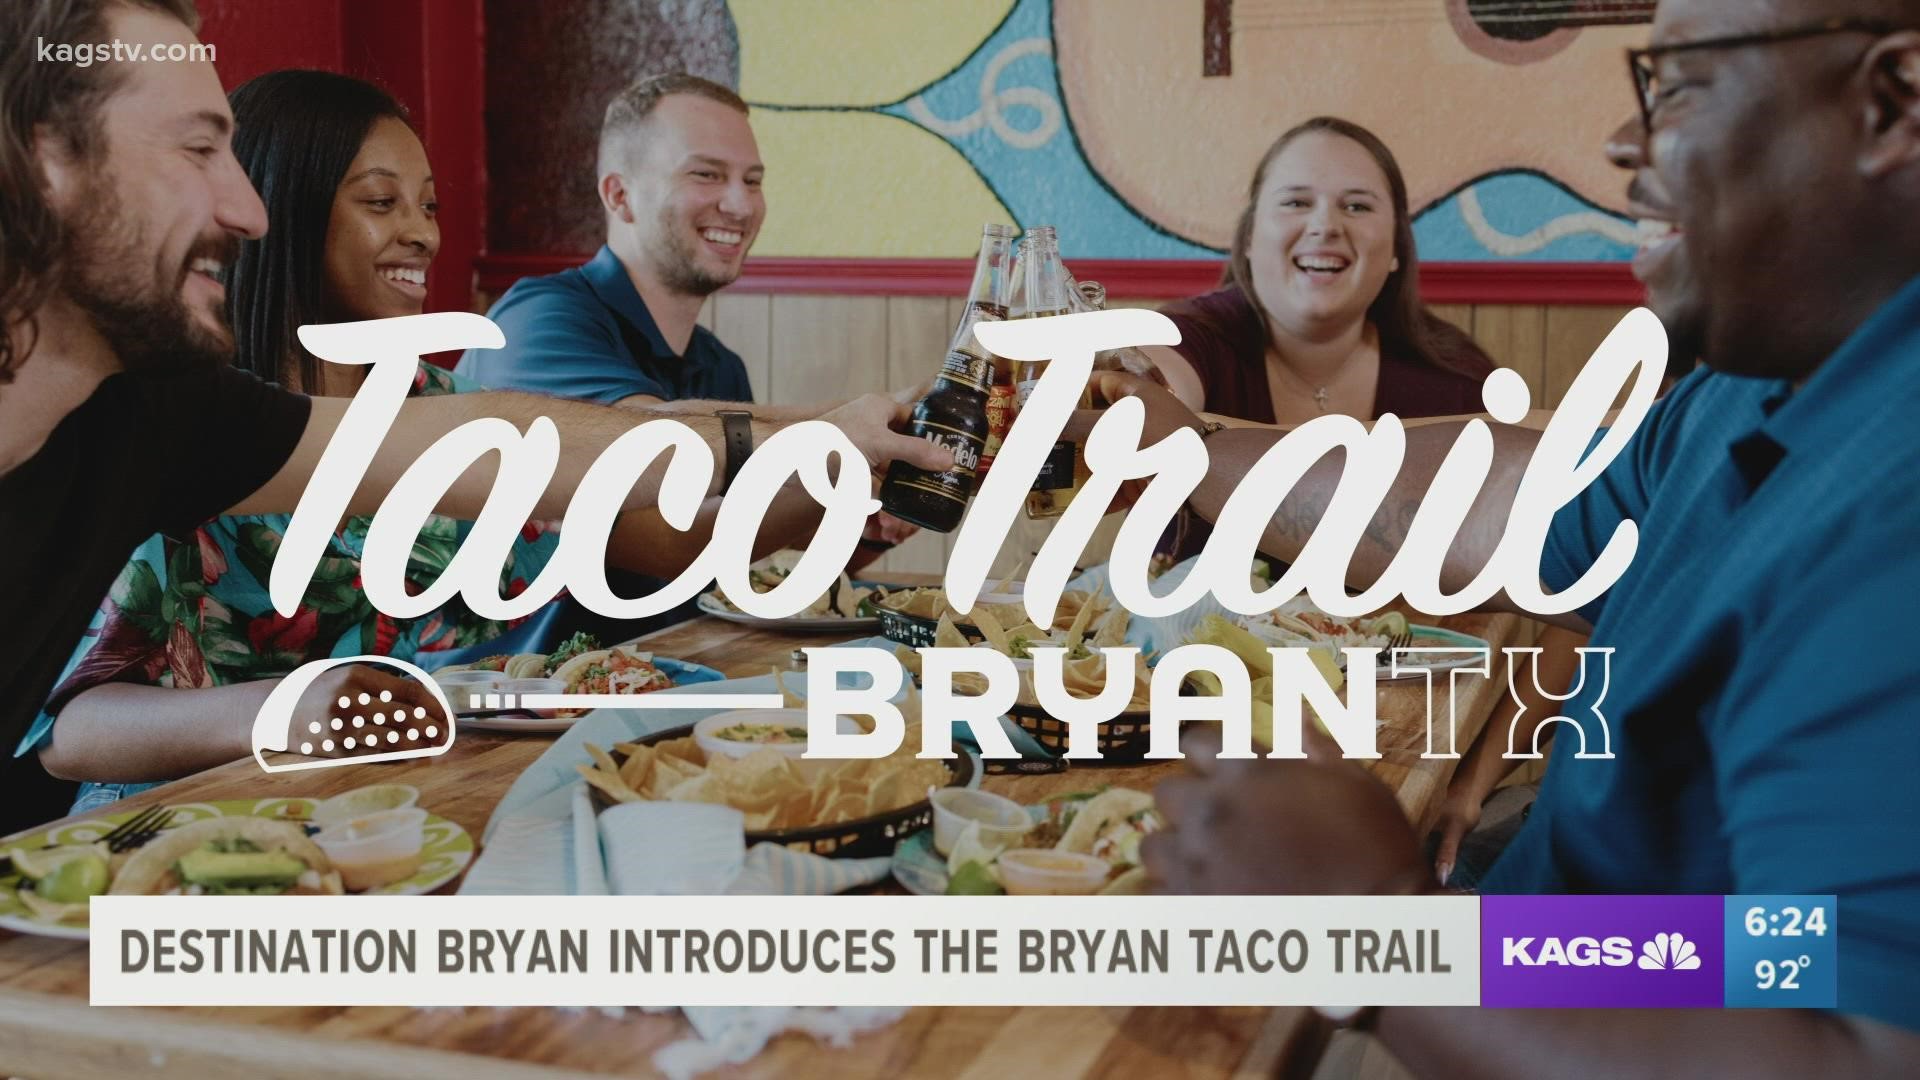 The Bryan Taco Trail passport program gives you the chance to try a variety of different taquerias, Mexican restaurants and fusion taco shops for a special prize.